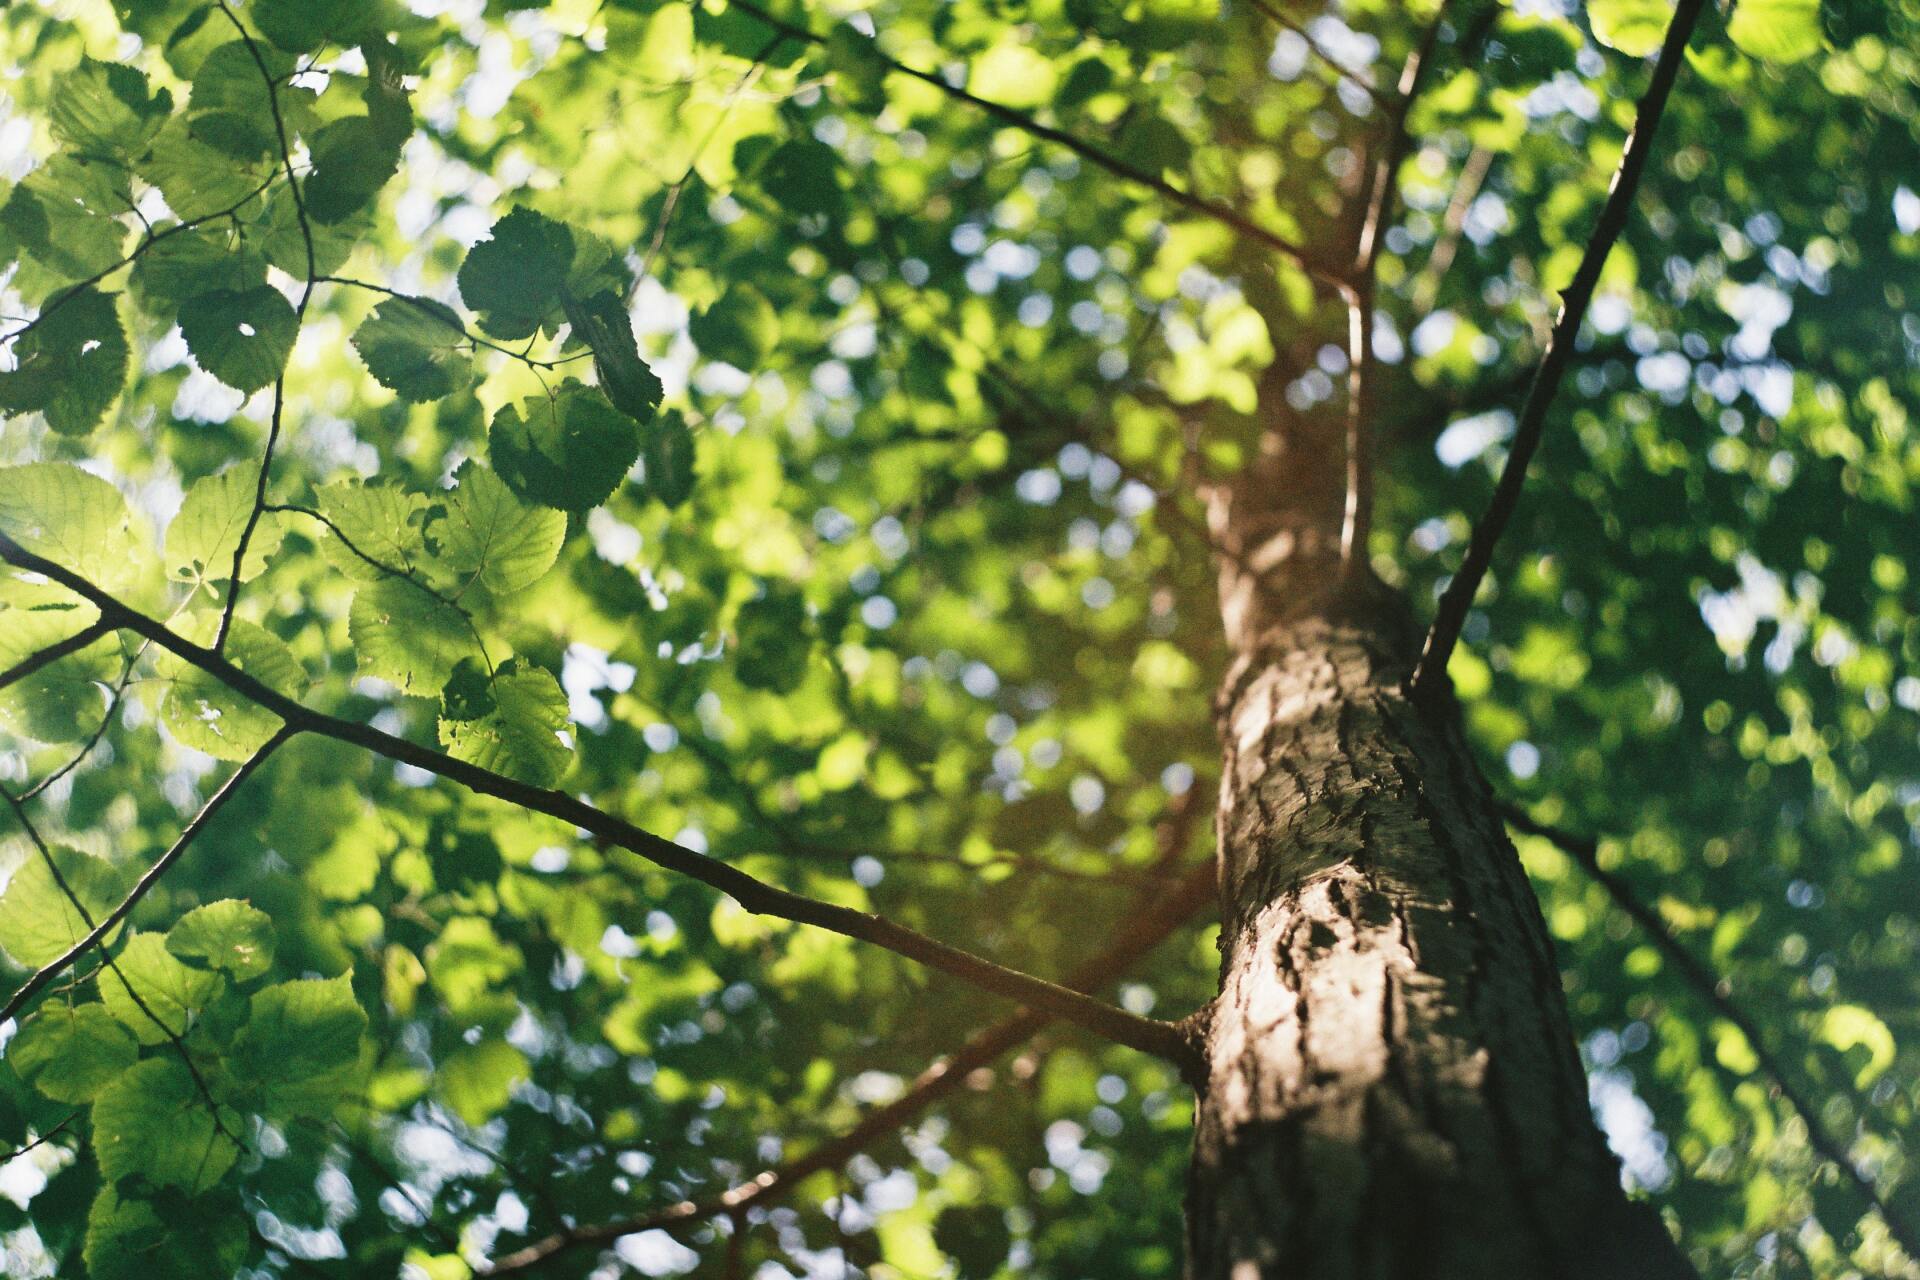 An imposing tree with sturdy branches and vibrant green leaves, standing tall in a lush forest.